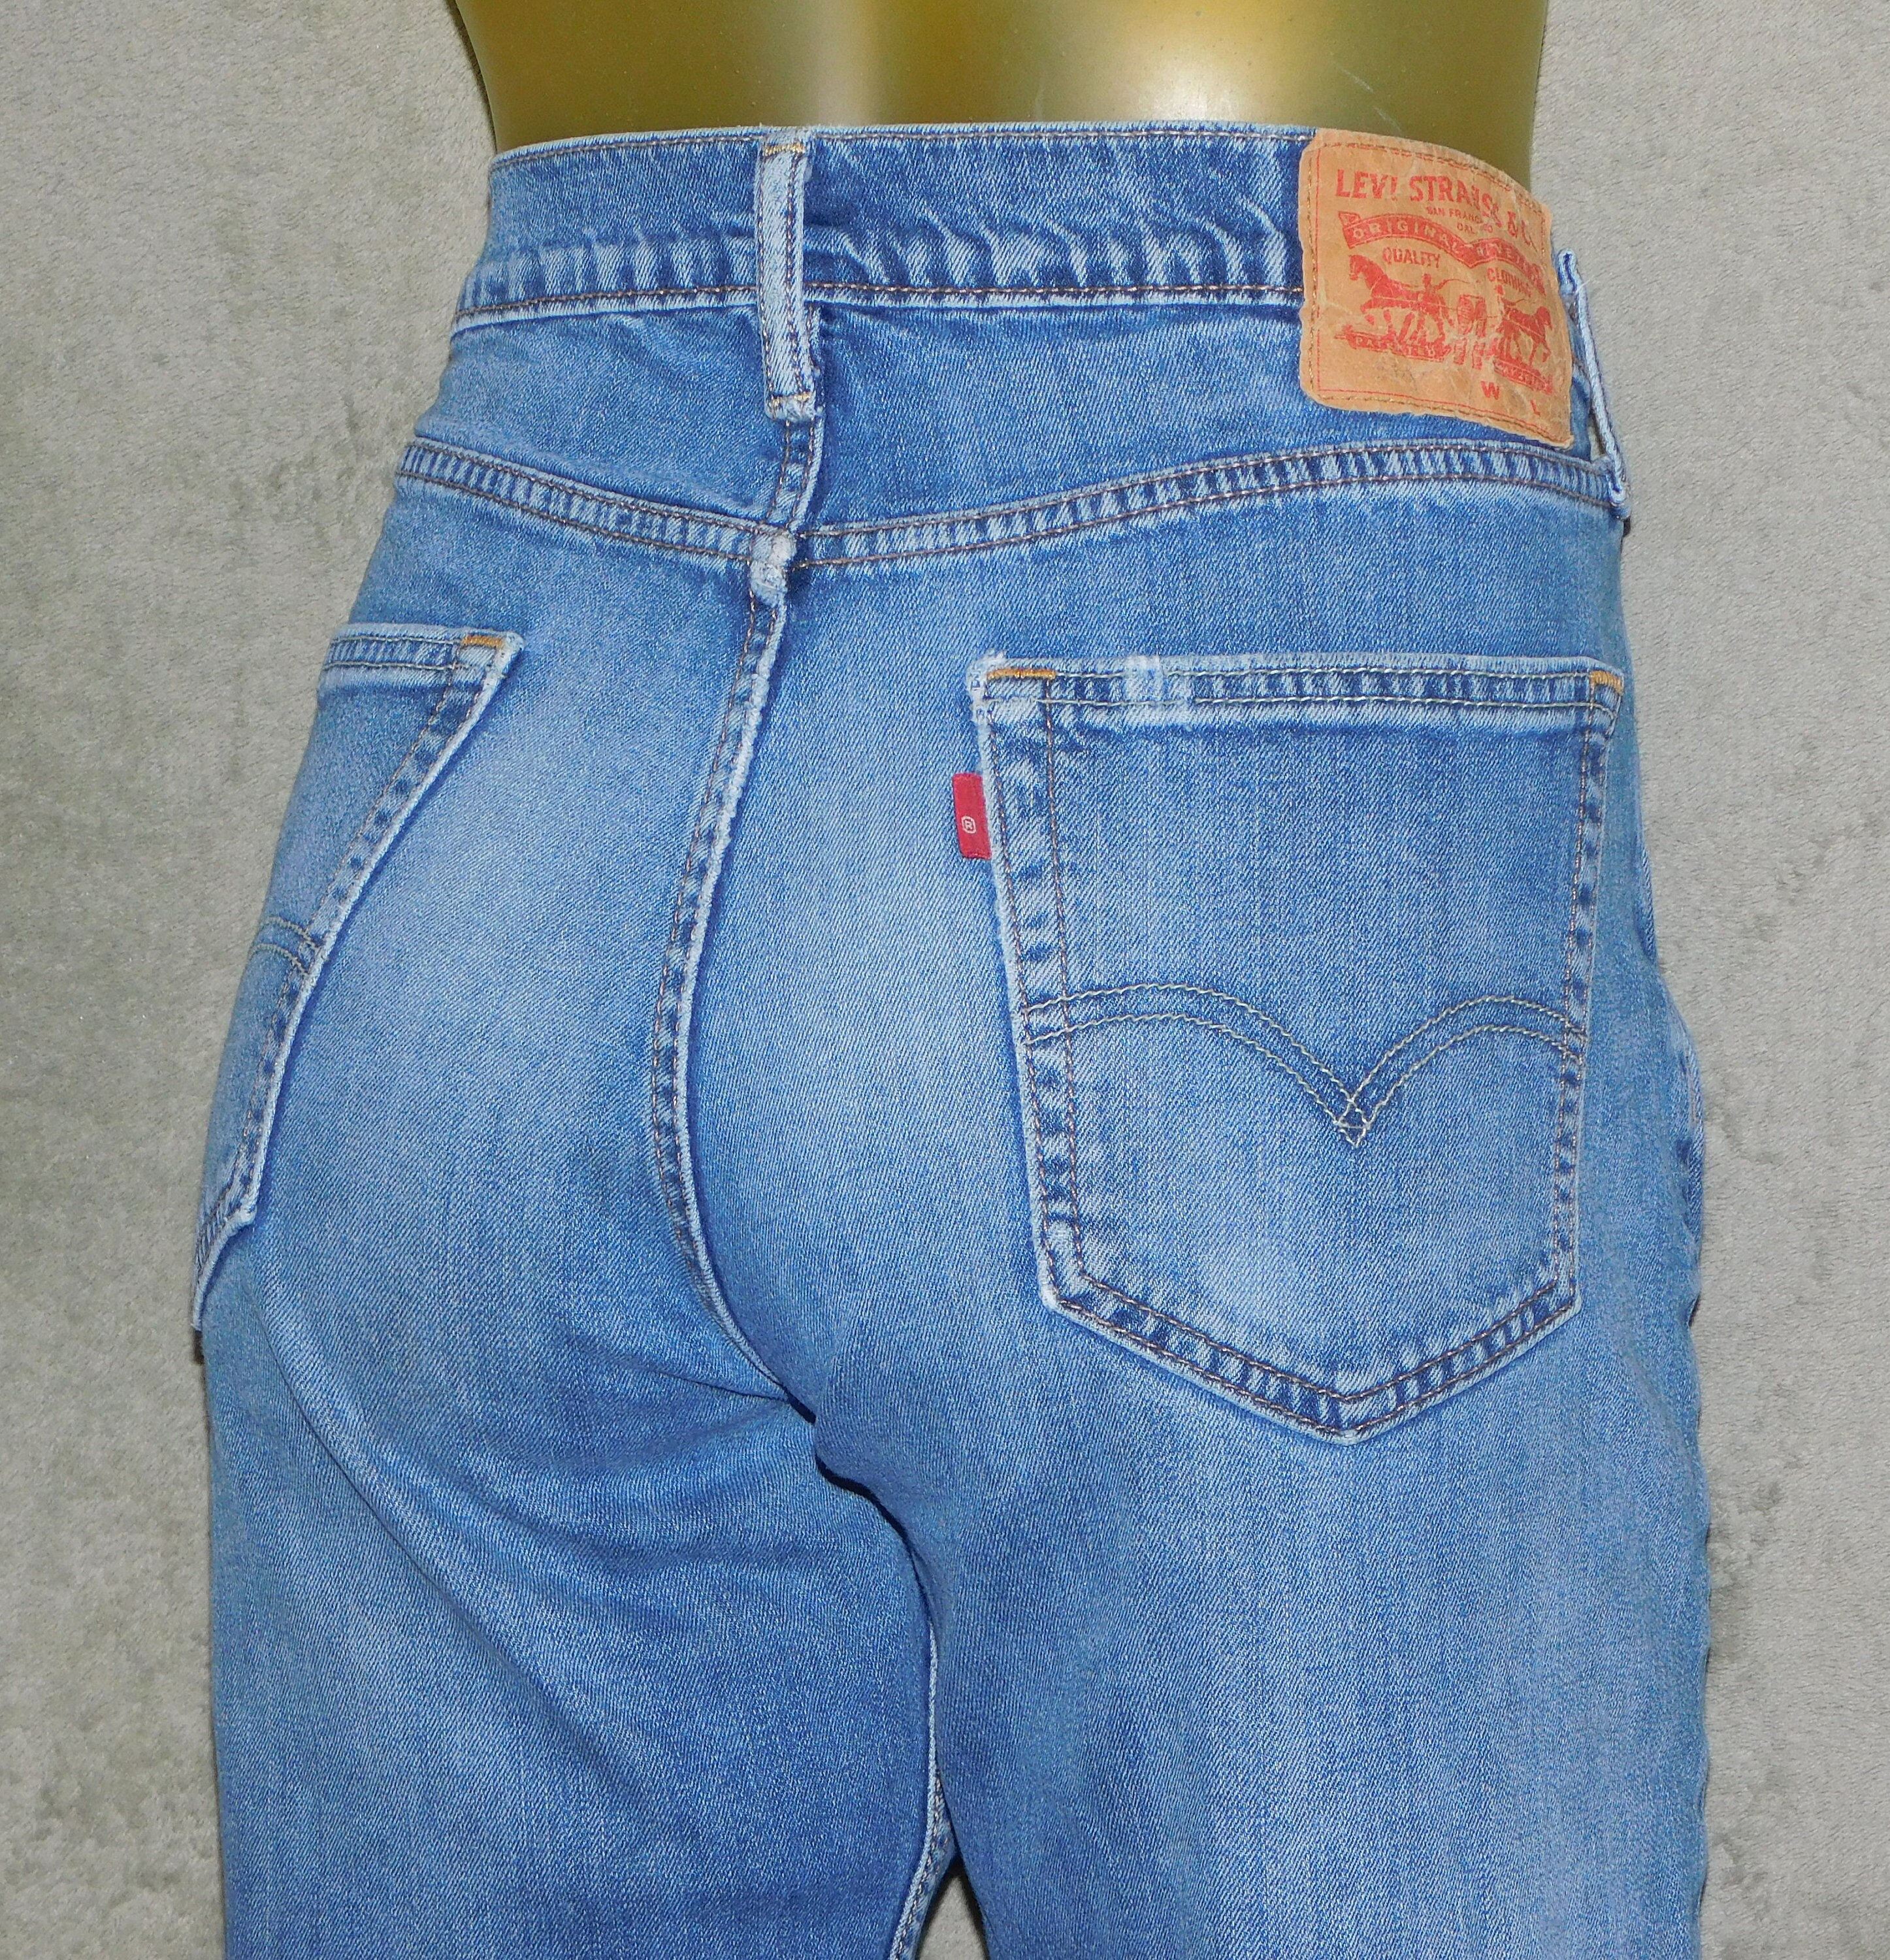 Used Levis Jeans - Etsy